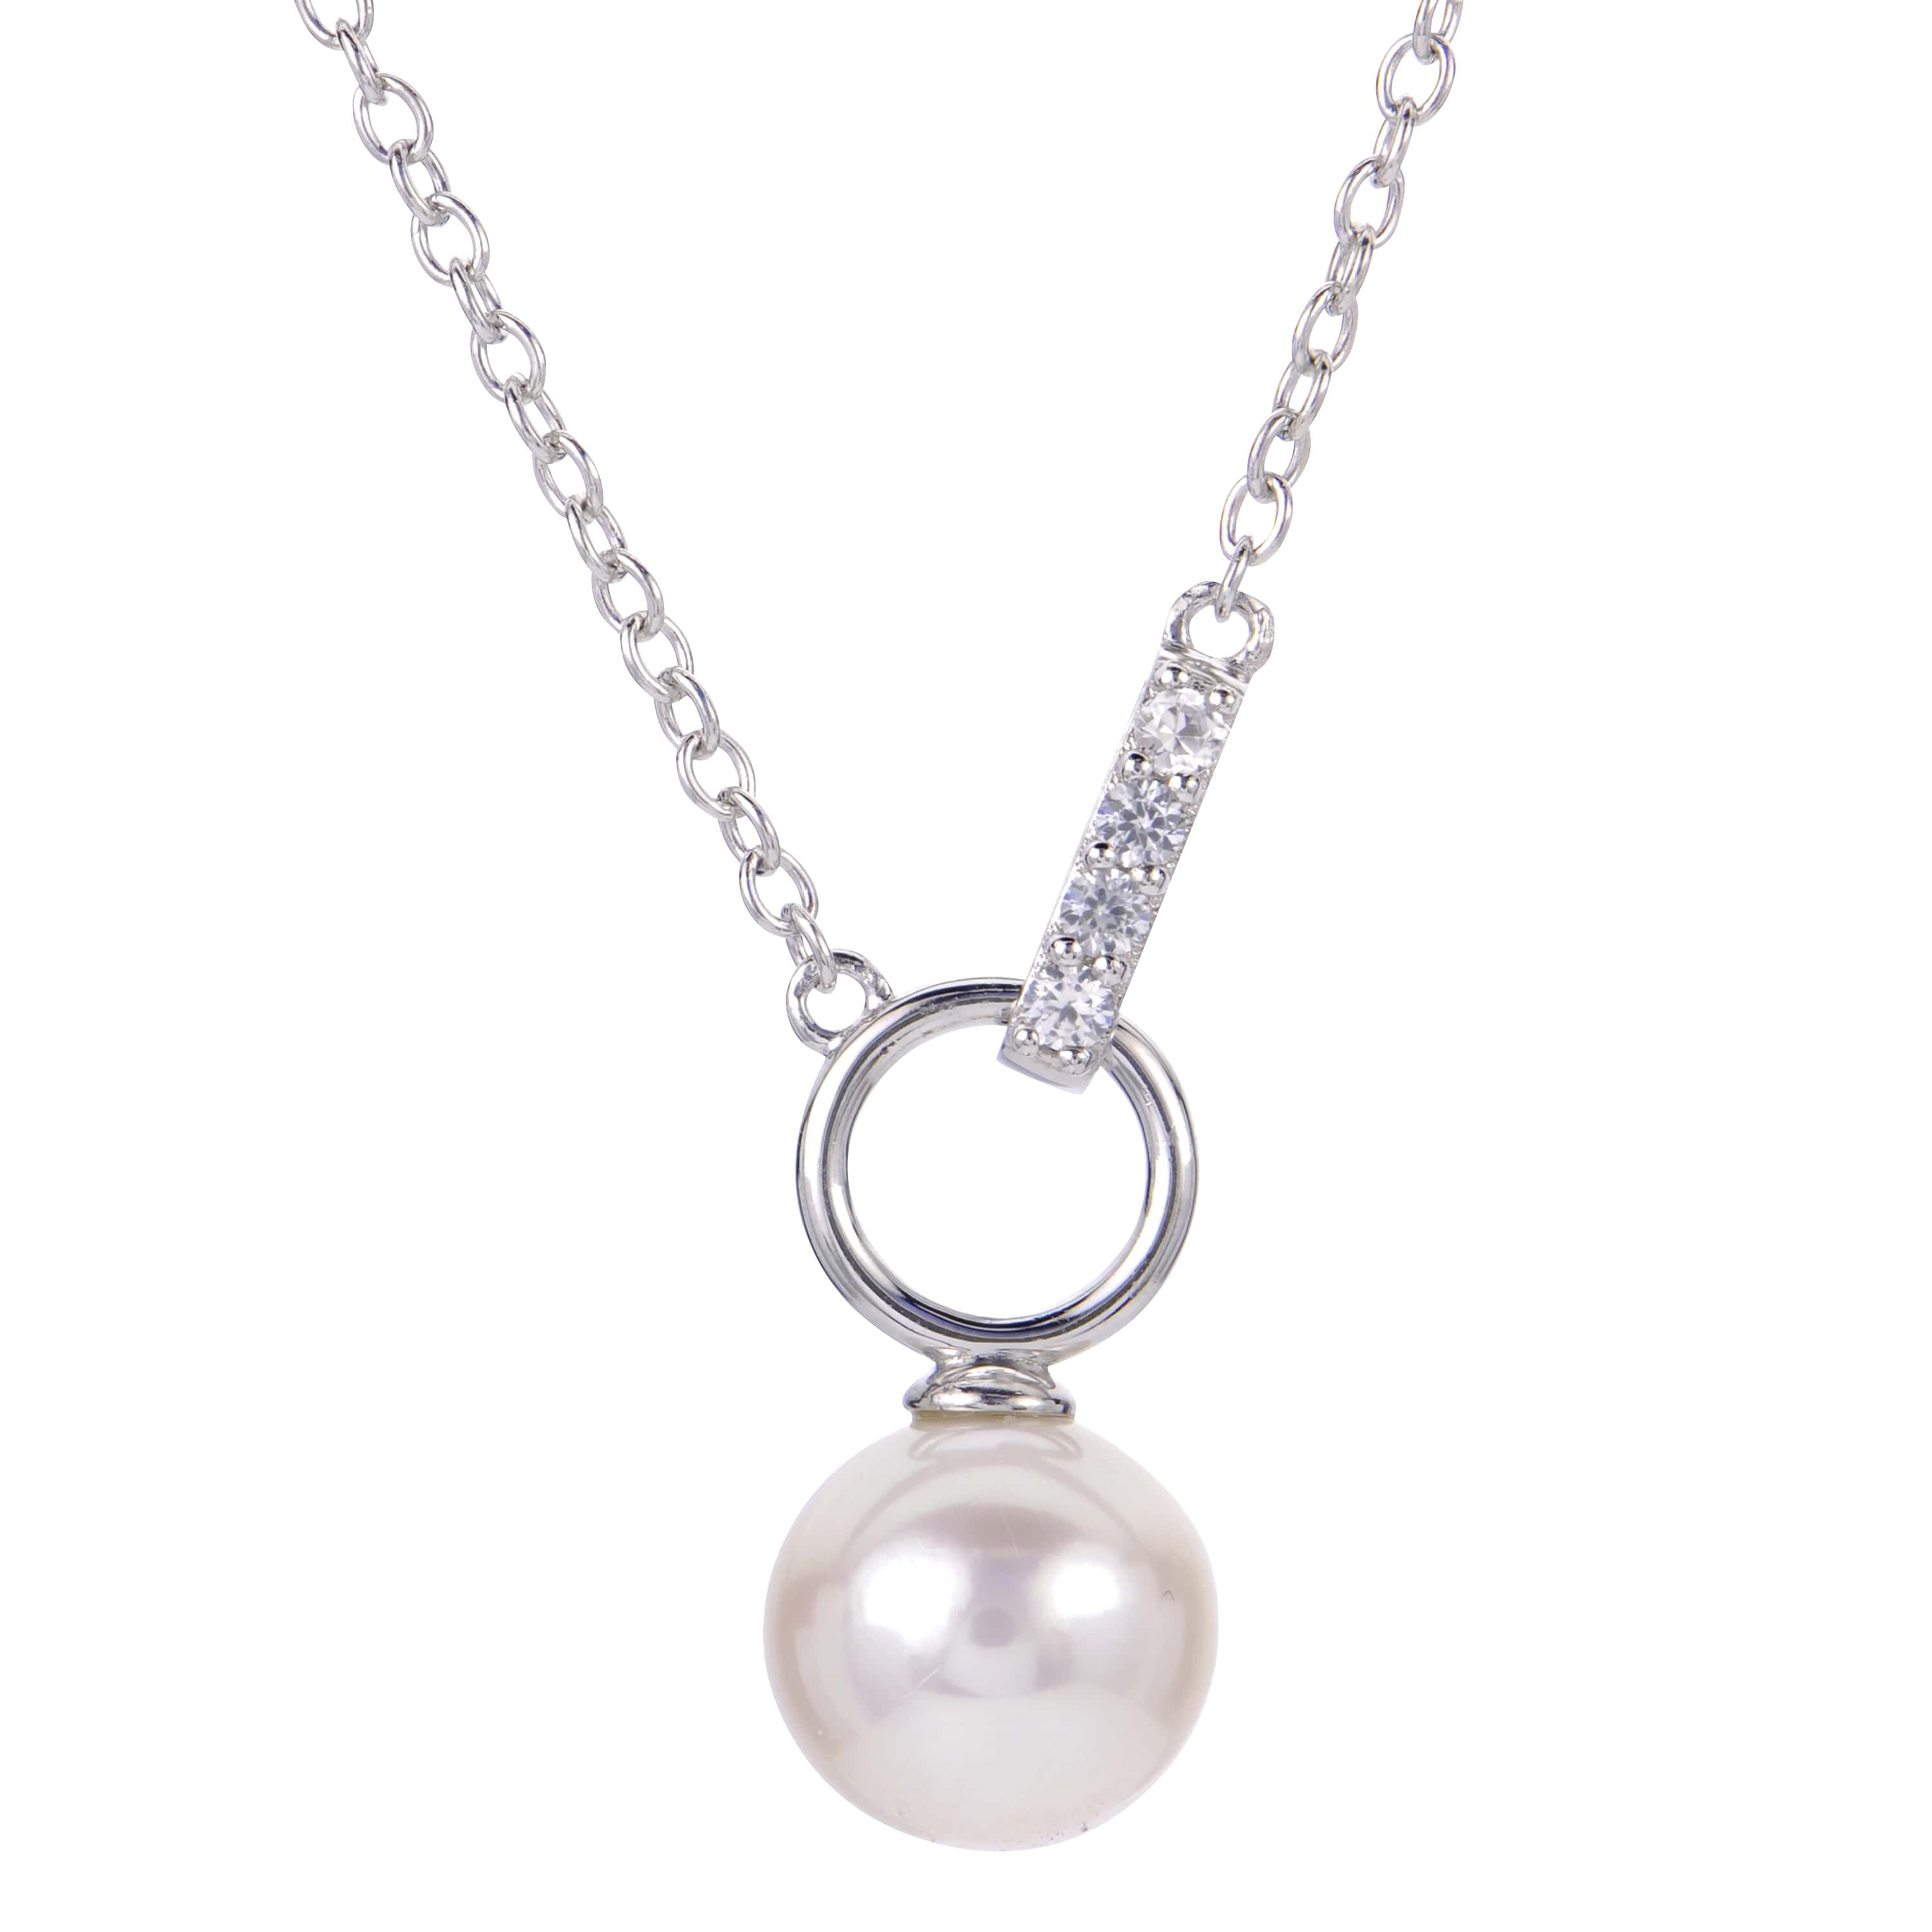 Perfectly Precious Pearl Necklace